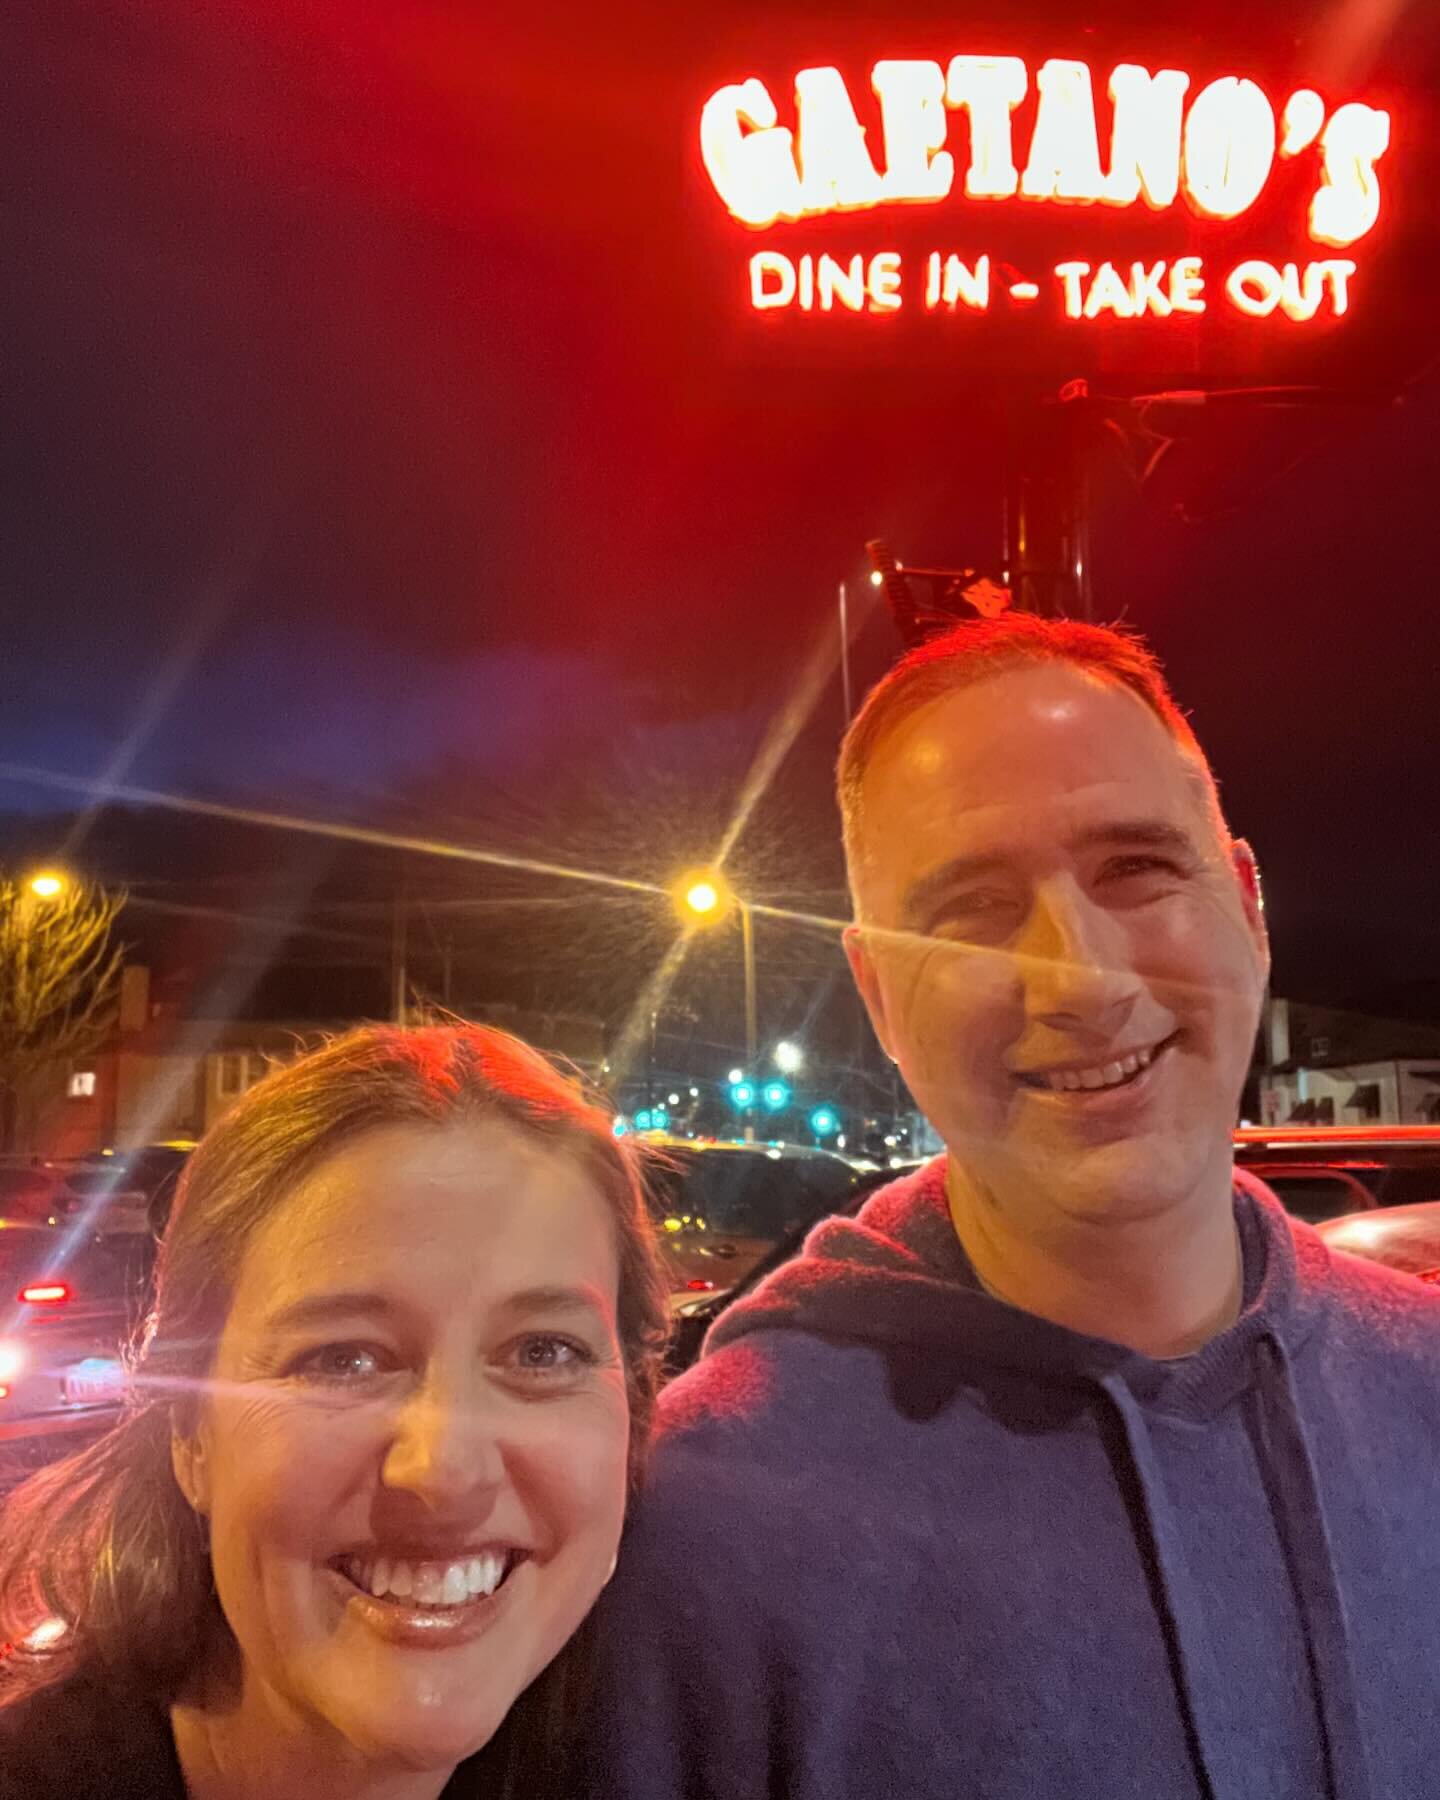 We ate at this very restaurant 25 years ago, on the night we were married, and we returned last night to celebrate. TWENTY-FIVE years! We are truly in awe. 

The Lord has been incredibly kind to me and @markoshman. There&rsquo;s no human reason we sh